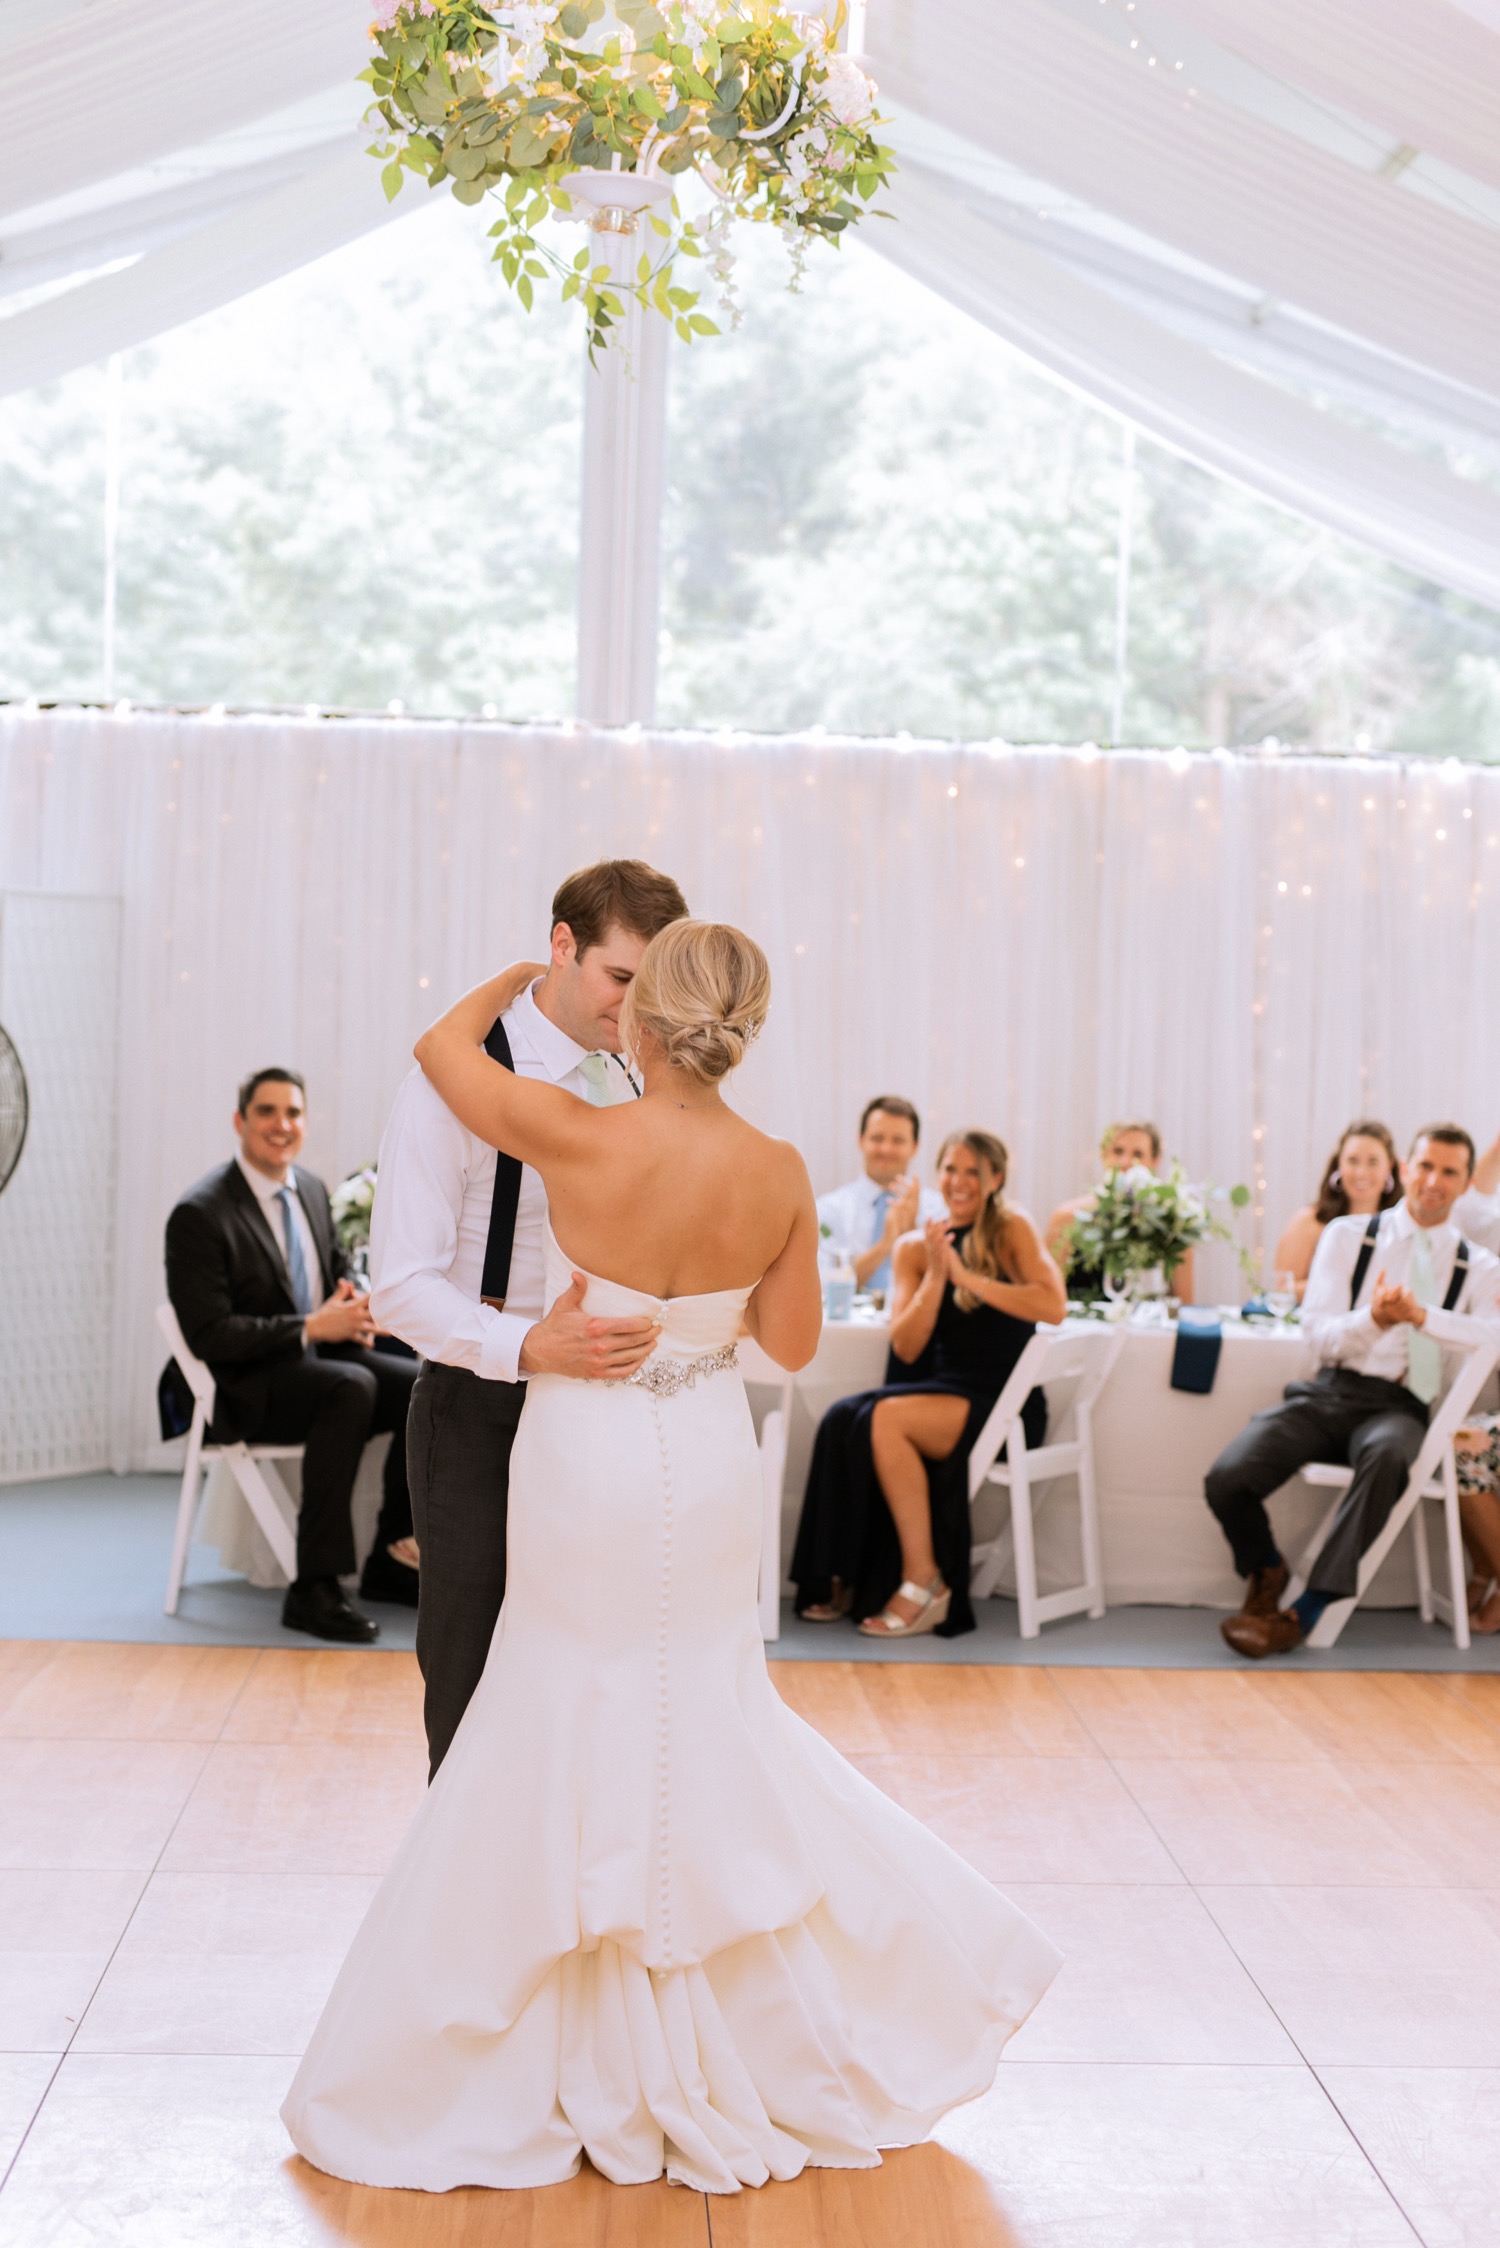 Bride and groom sharing their first dance during wedding reception at Amber Grove in Richmond, Virginia